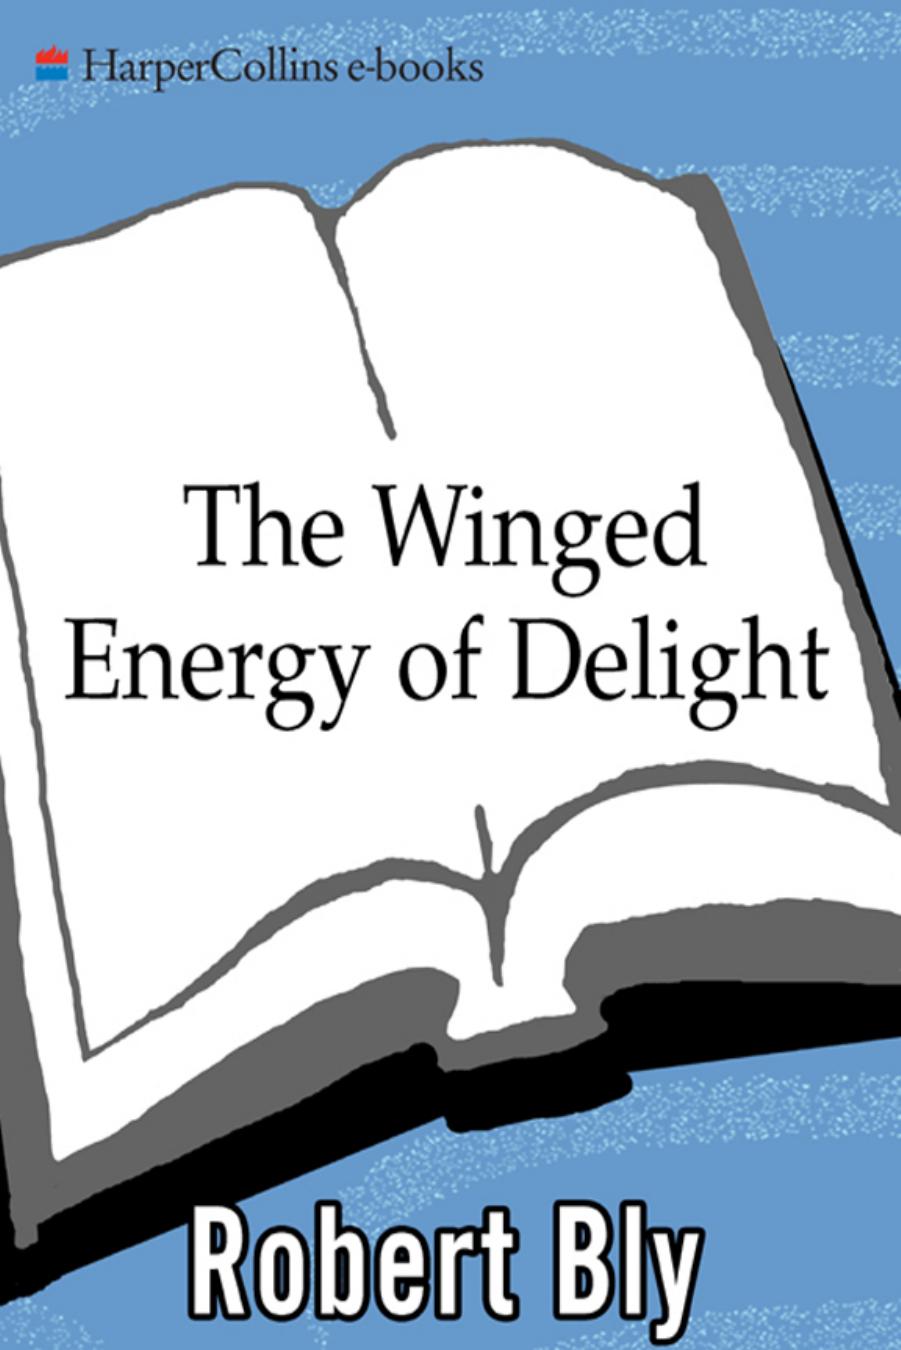 The Winged Energy of Delight by Robert Bly